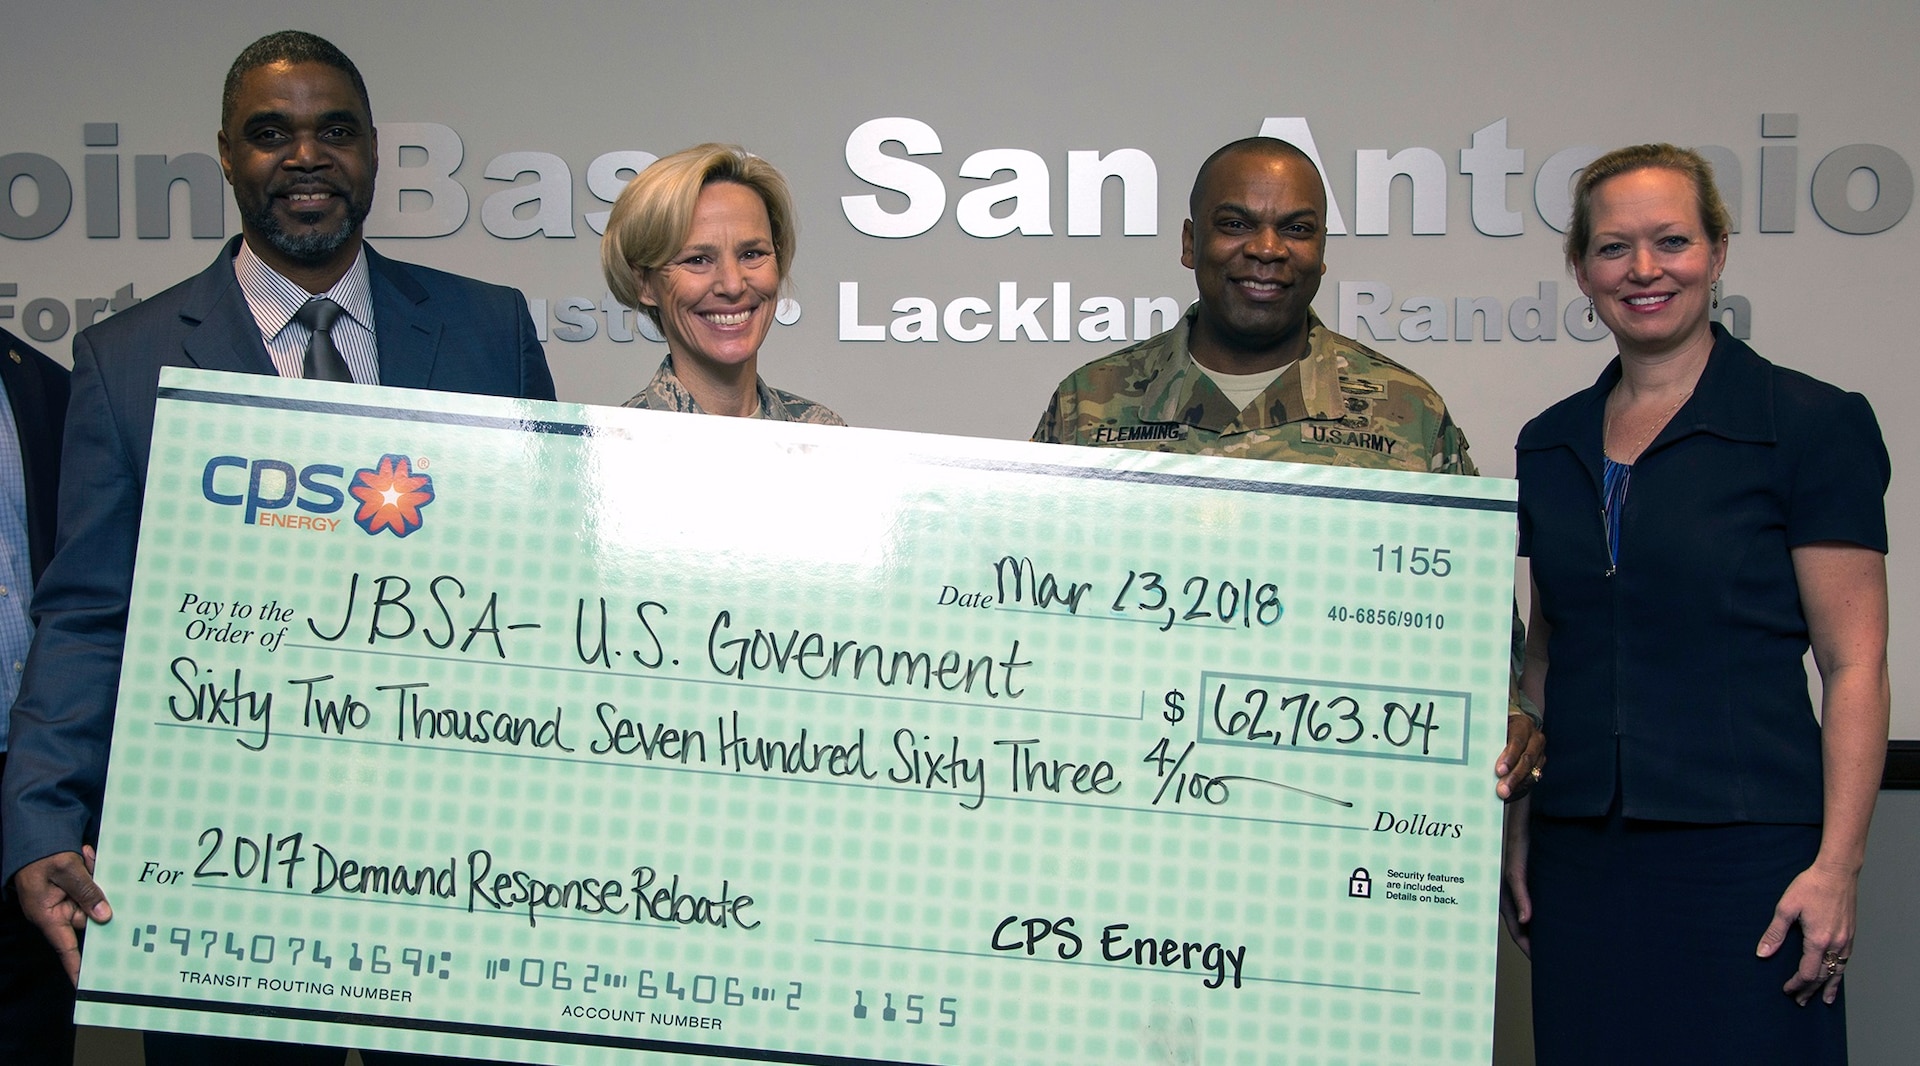 Garrick Williams (left), JBSA Energy Solutions director with CPS Energy, presents (from left) Brig. Gen. Heather Pringle (right), 502nd Air Base Wing and Joint Base San Antonio commander, Col. Lee Flemming, 502nd ABW and JBSA vice commander, and Brenda Roesch, 502nd Civil Engineer Squadron director, a rebate check for $62,763.04 at the 502nd ABW headquarters at JBSA-Fort Sam Houston March 13.